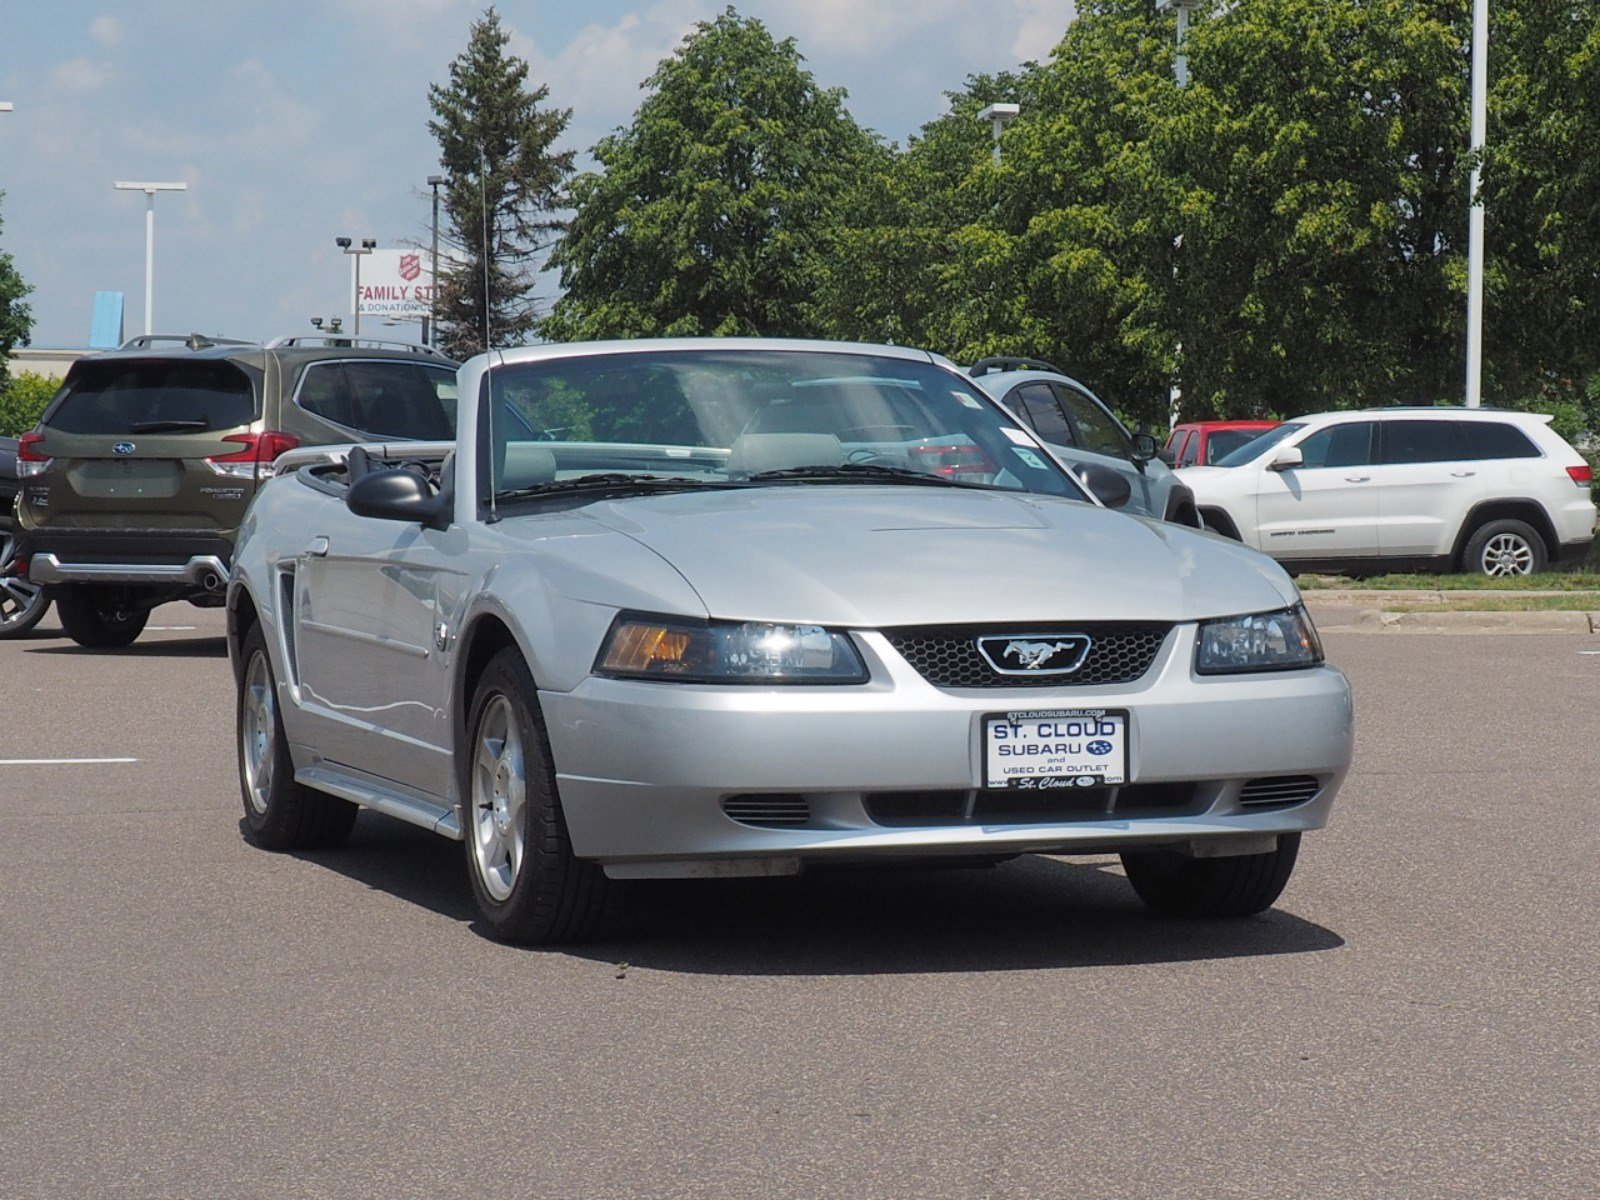 Used 2004 Ford Mustang Deluxe with VIN 1FAFP44634F197279 for sale in Saint Cloud, Minnesota